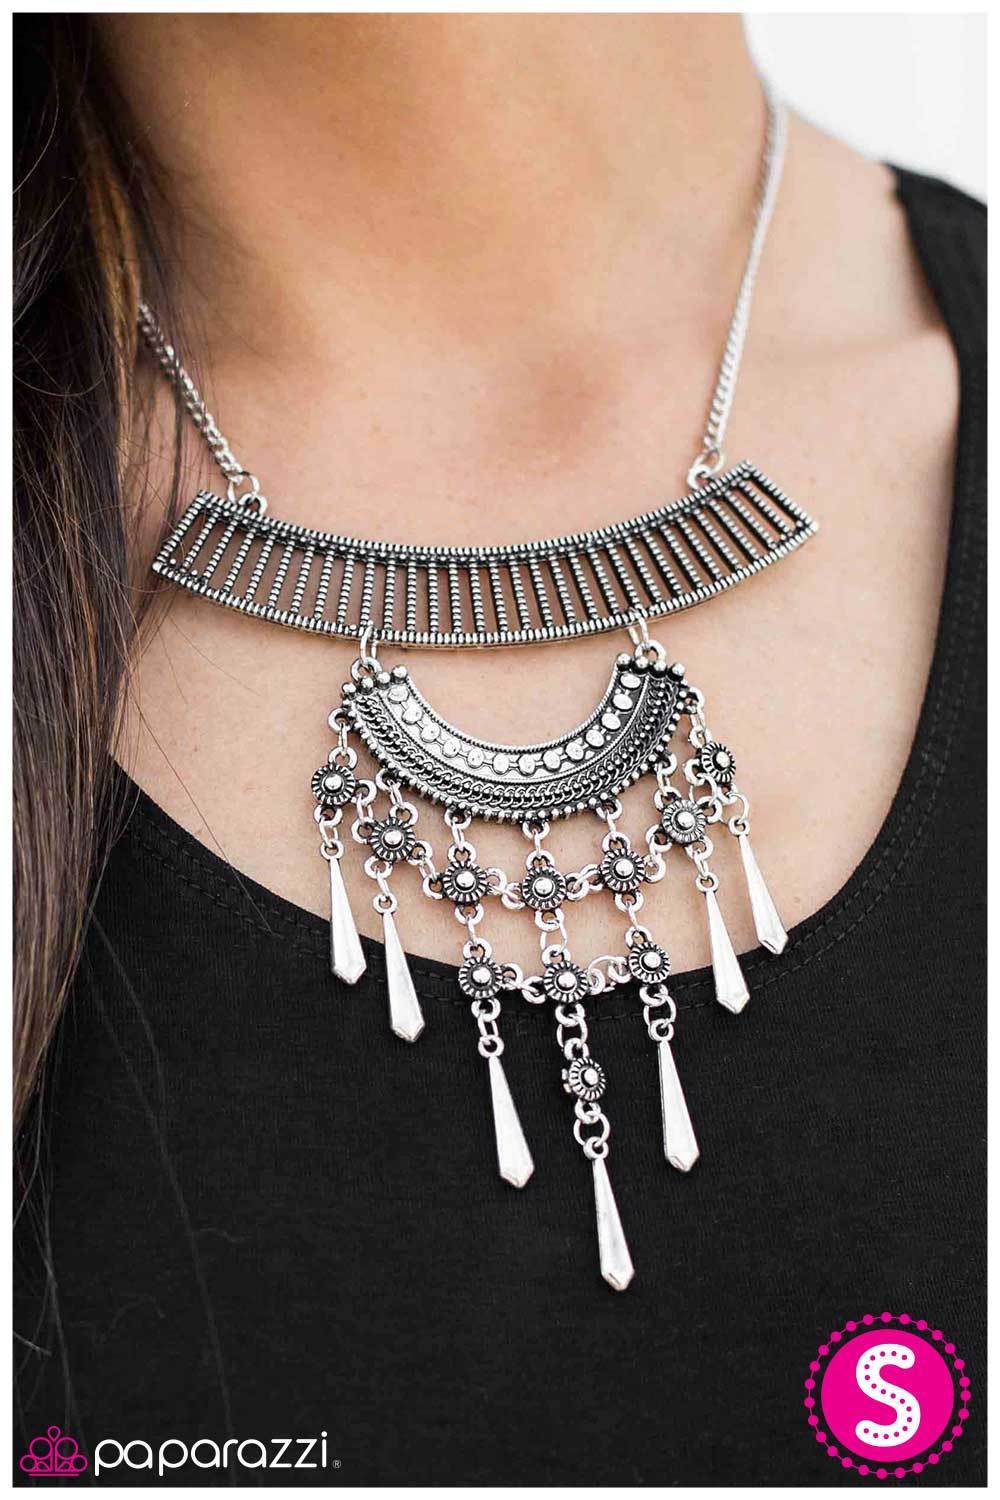 The Grand Geisha Silver Necklace and matching Earrings - Paparazzi Accessories-CarasShop.com - $5 Jewelry by Cara Jewels